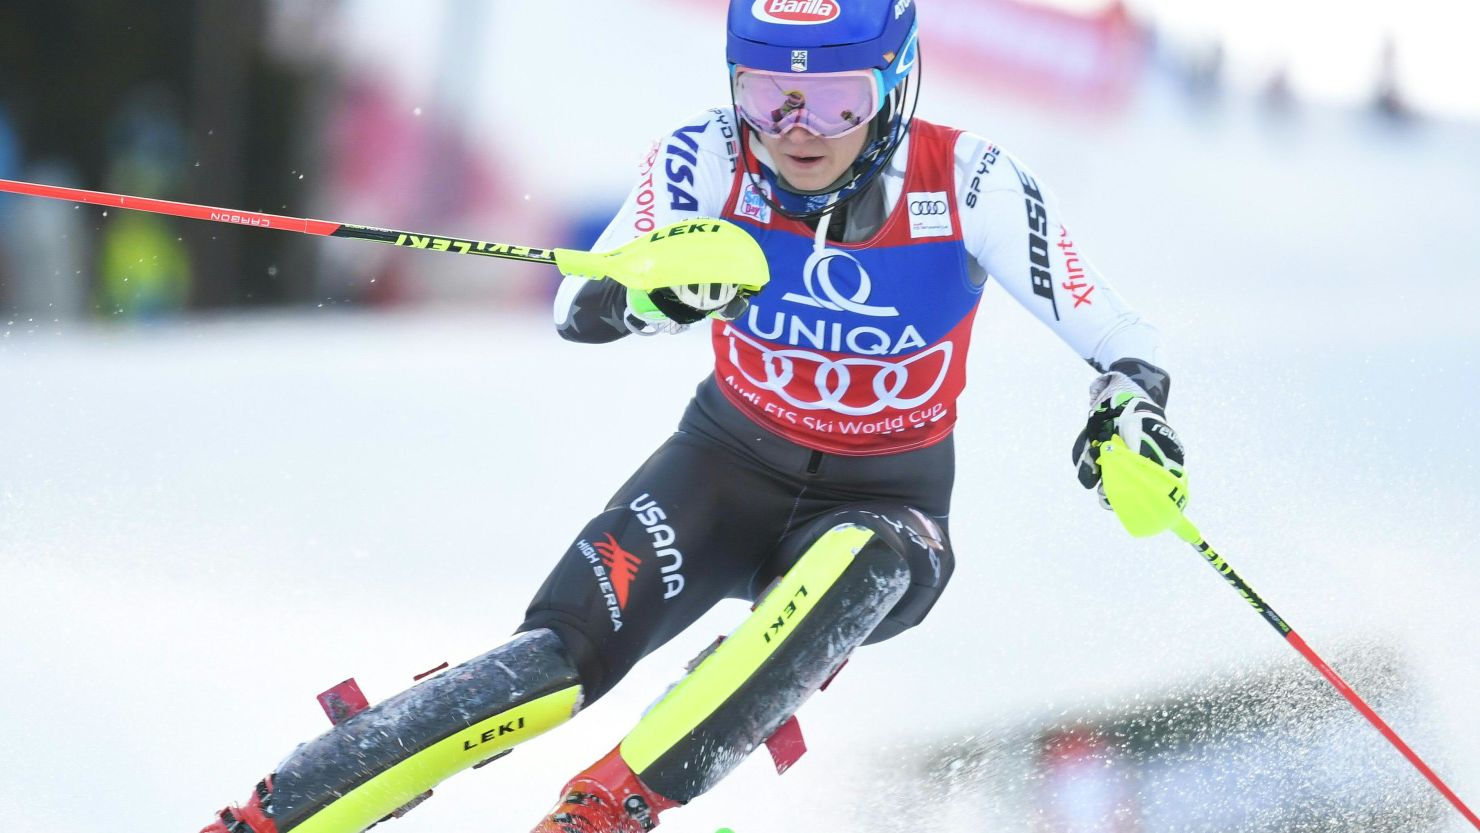 Mikaela Shiffrin ends 2018 with double record win | CNN